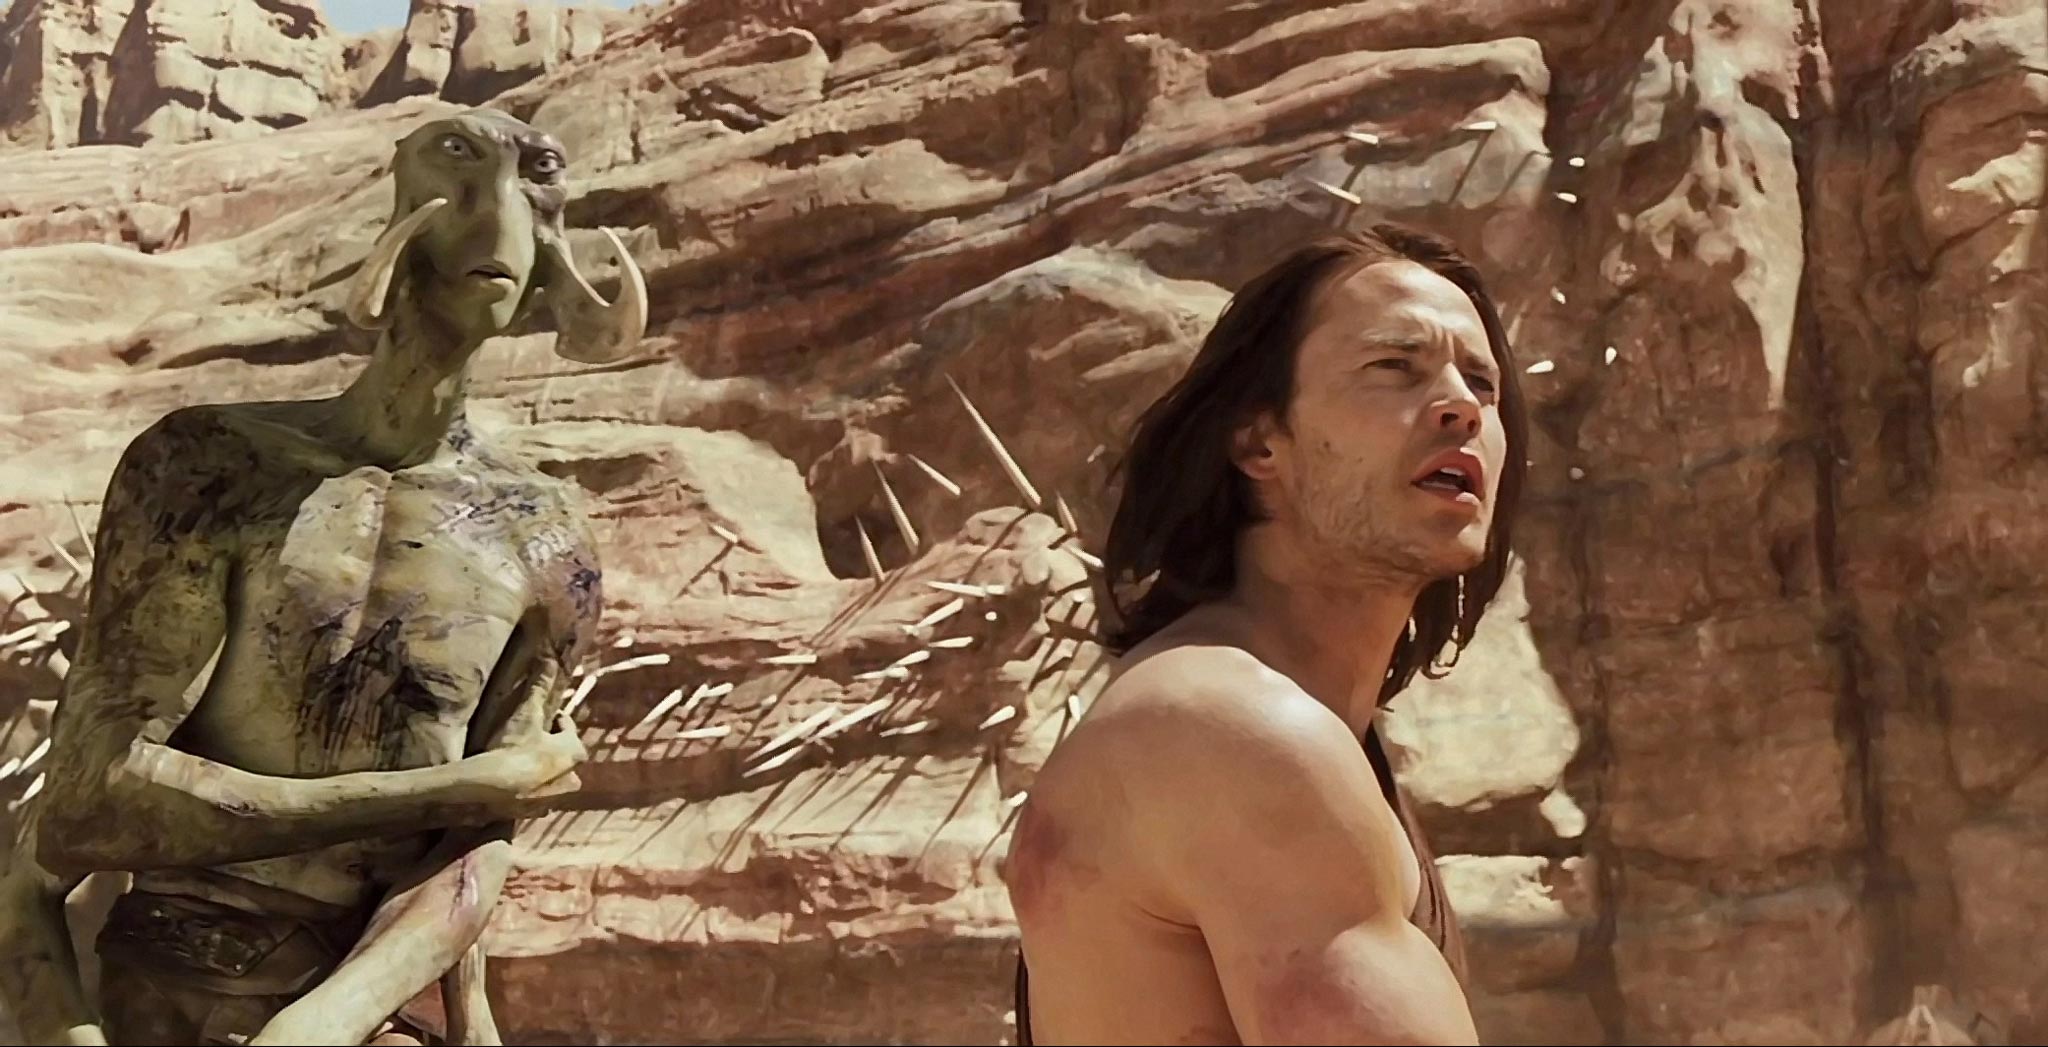 Final Trailer and Extended Clip For 'John Carter'